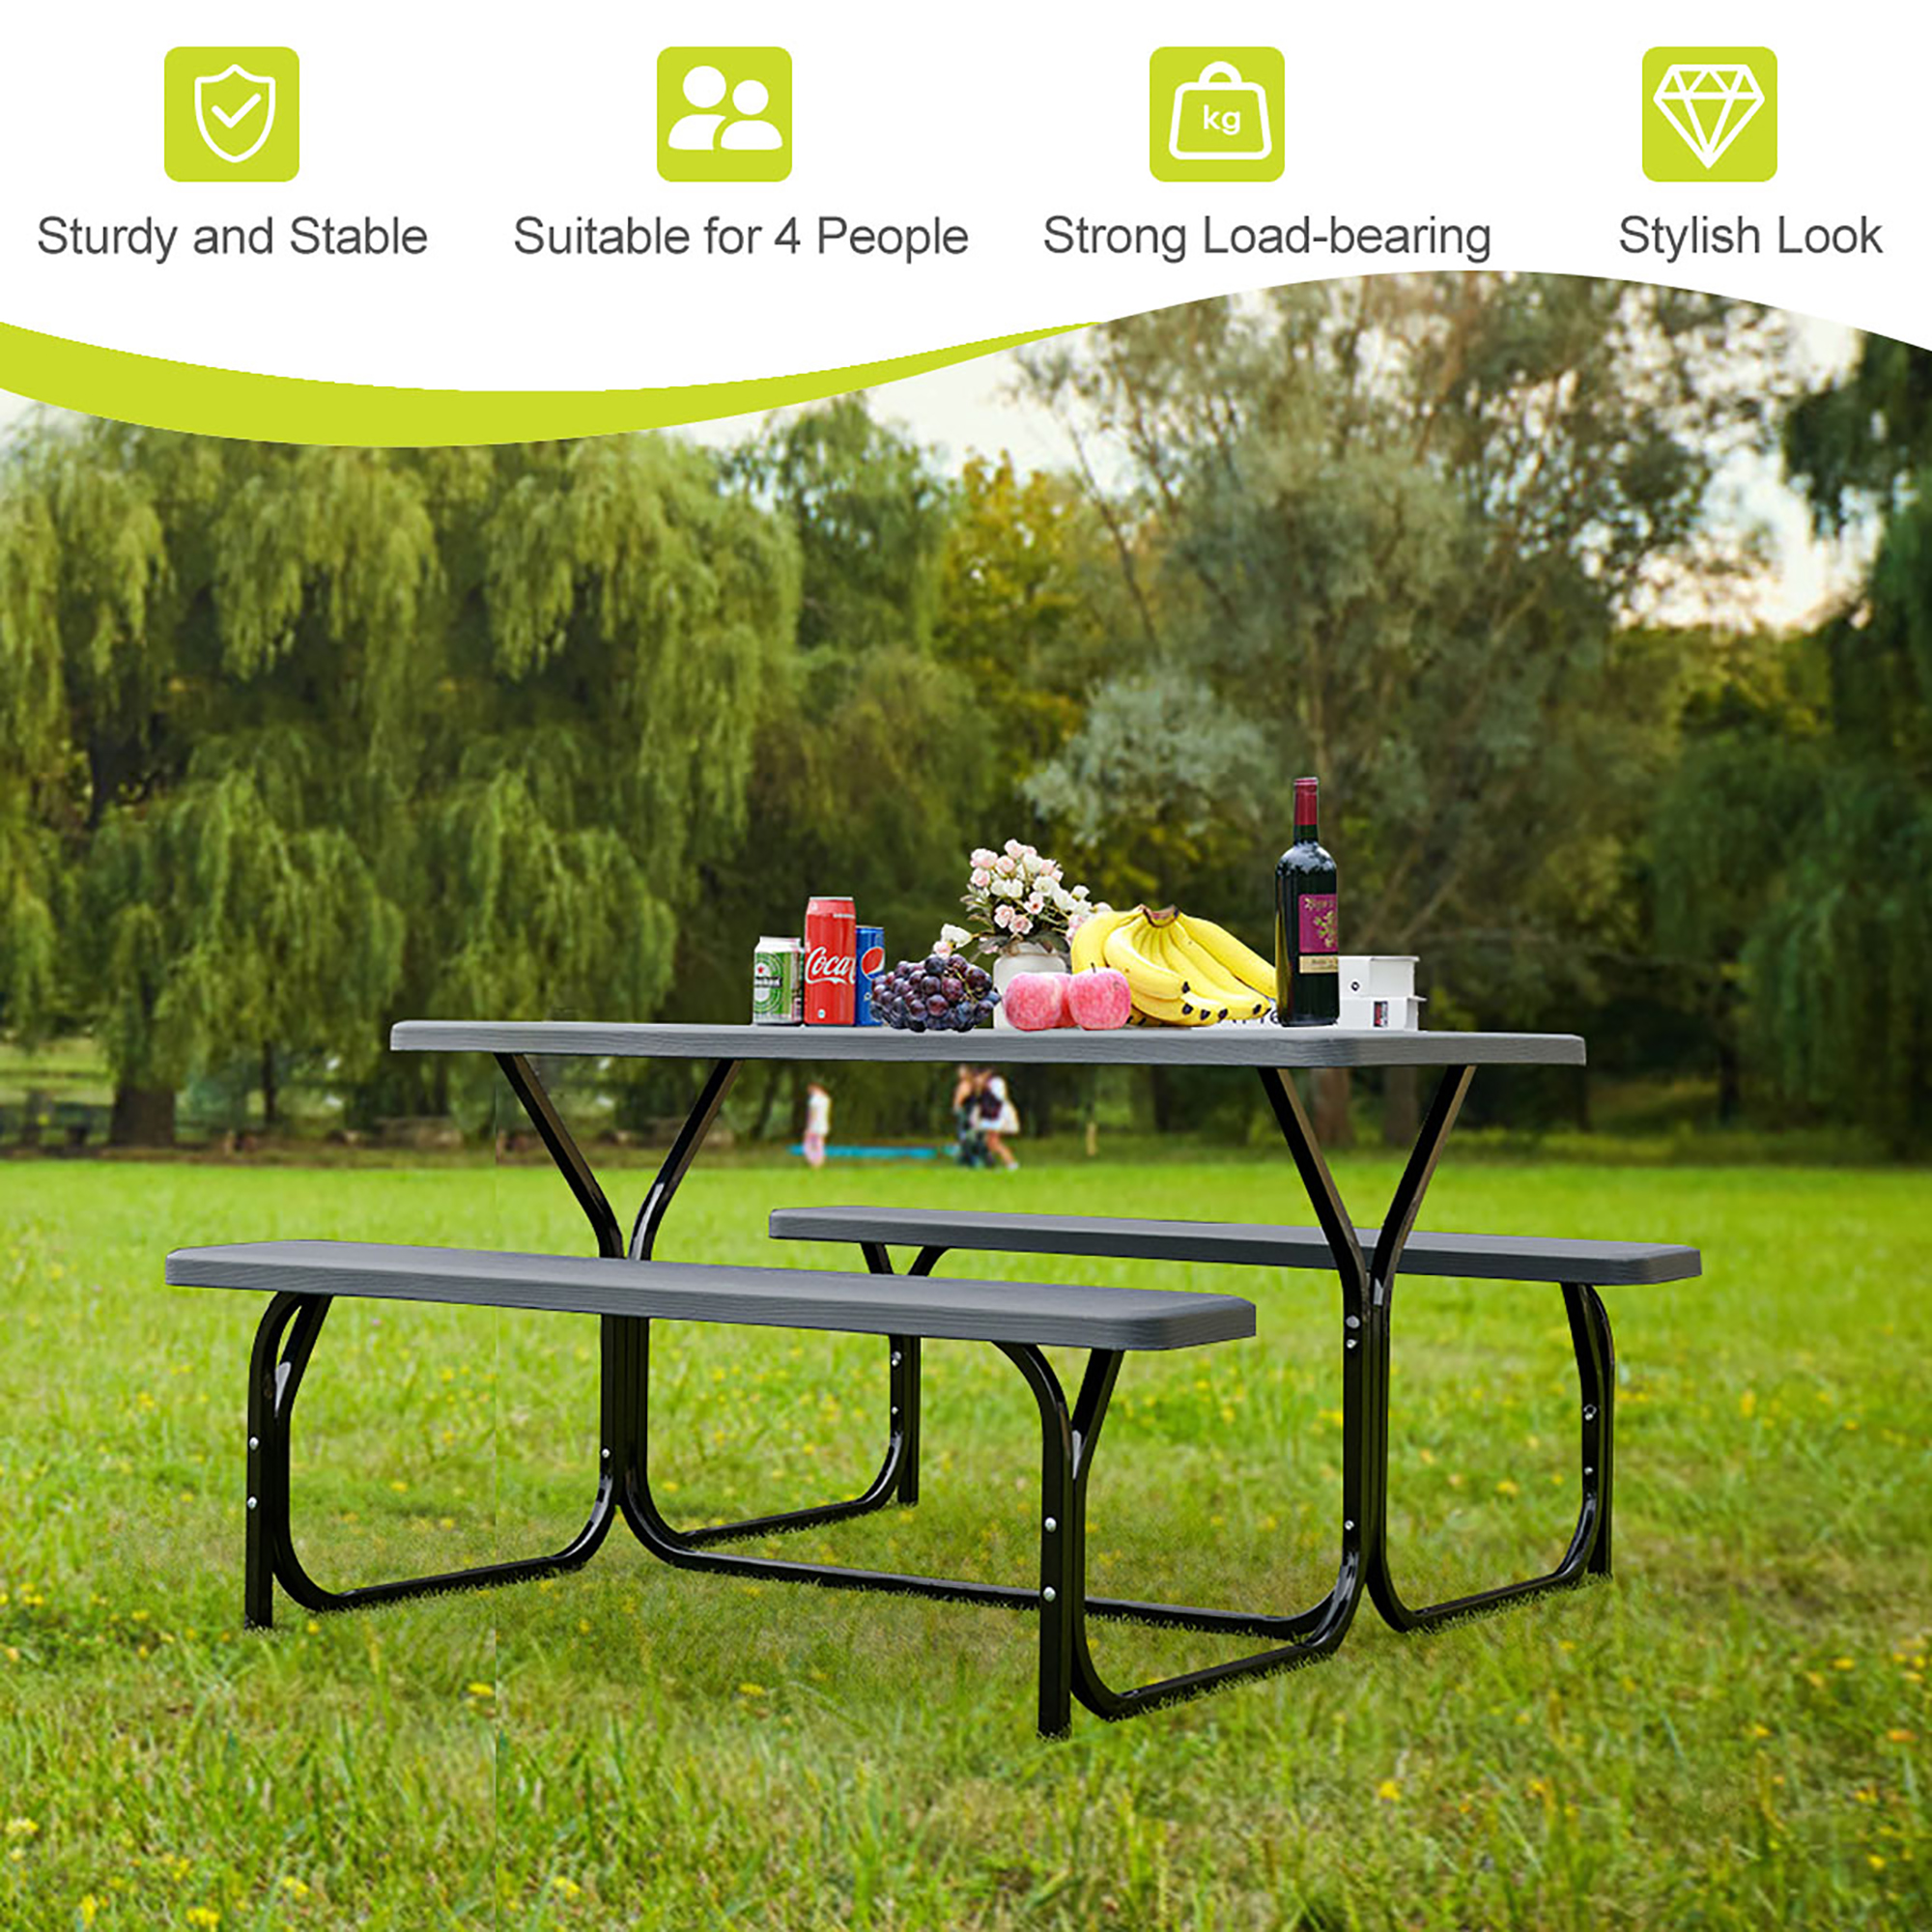 Costway Picnic Table Bench Set Outdoor Backyard Iron Patio Garden Party Dining All Weather Black - image 5 of 8